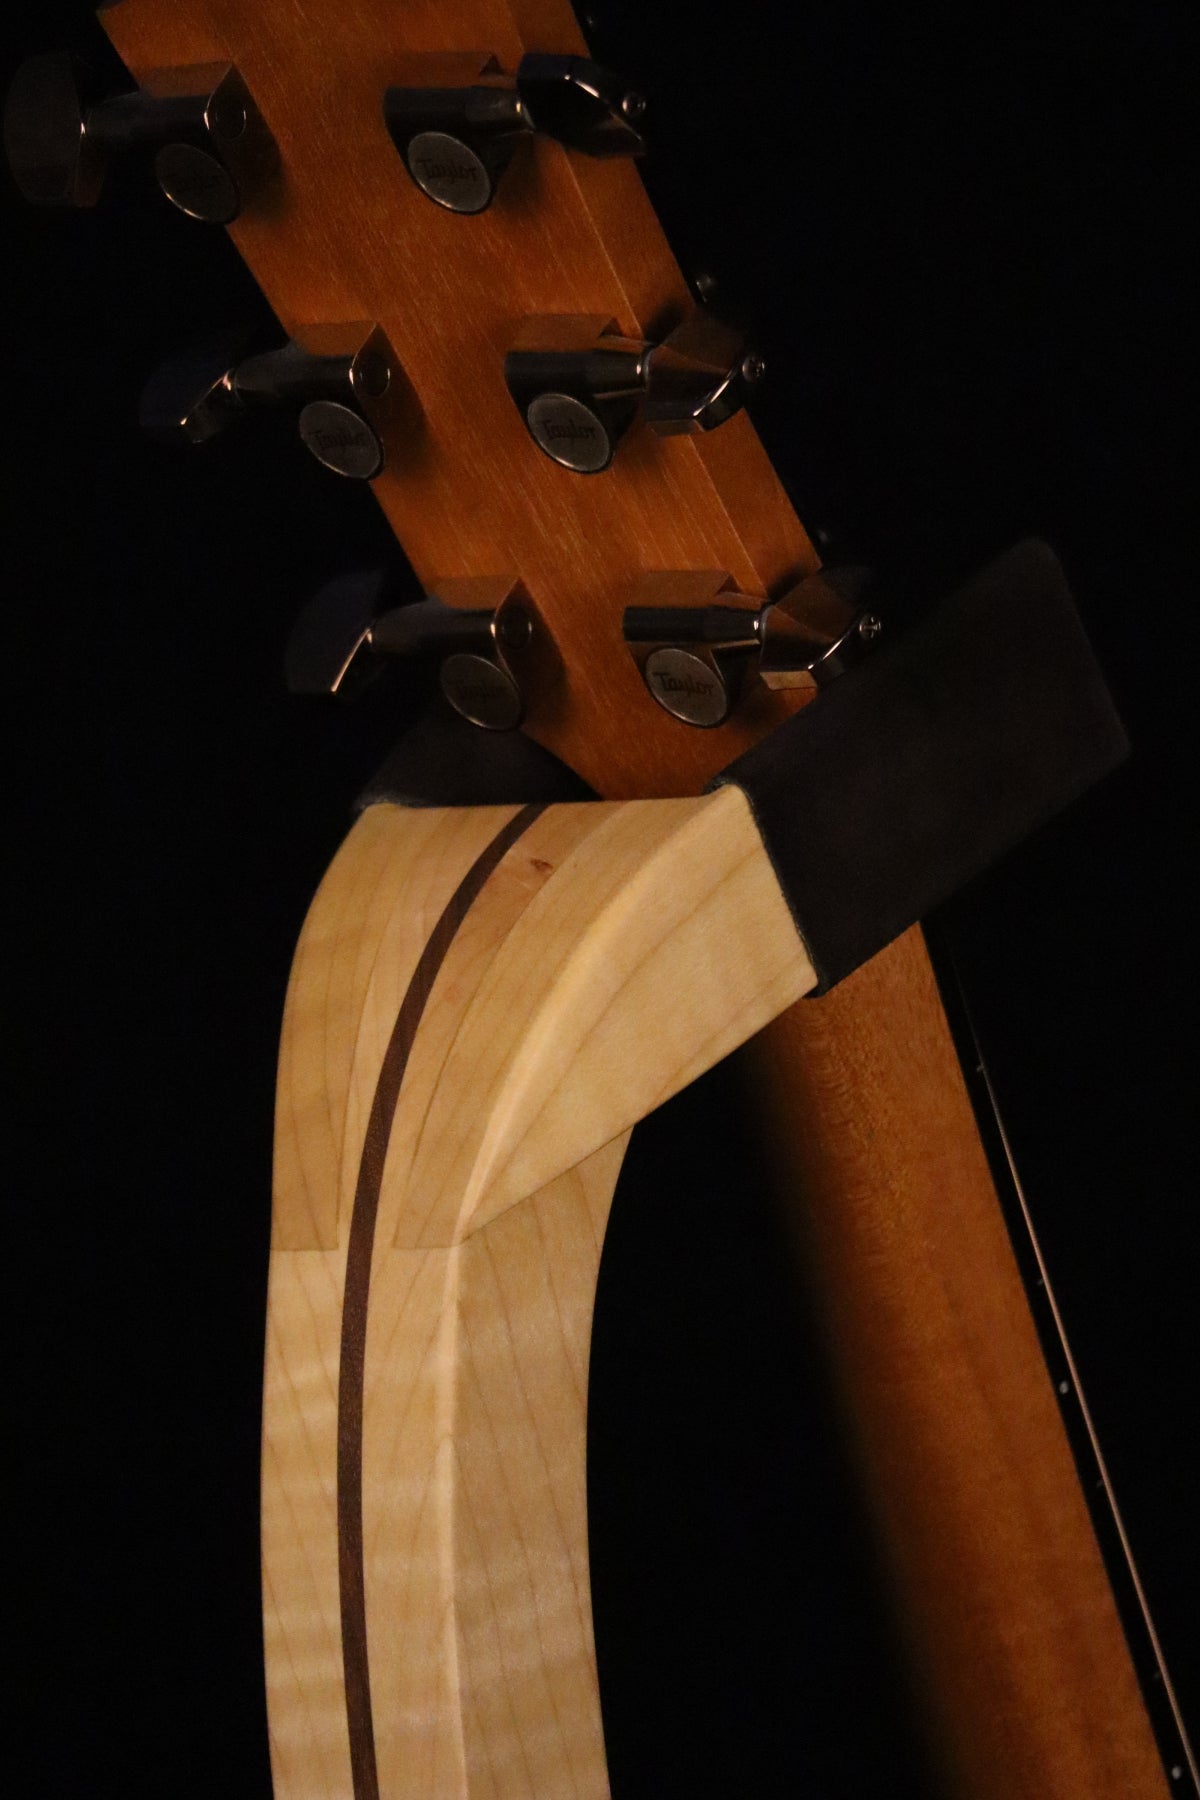 Folding curly maple and walnut wood guitar floor stand yoke detail image with Taylor guitar